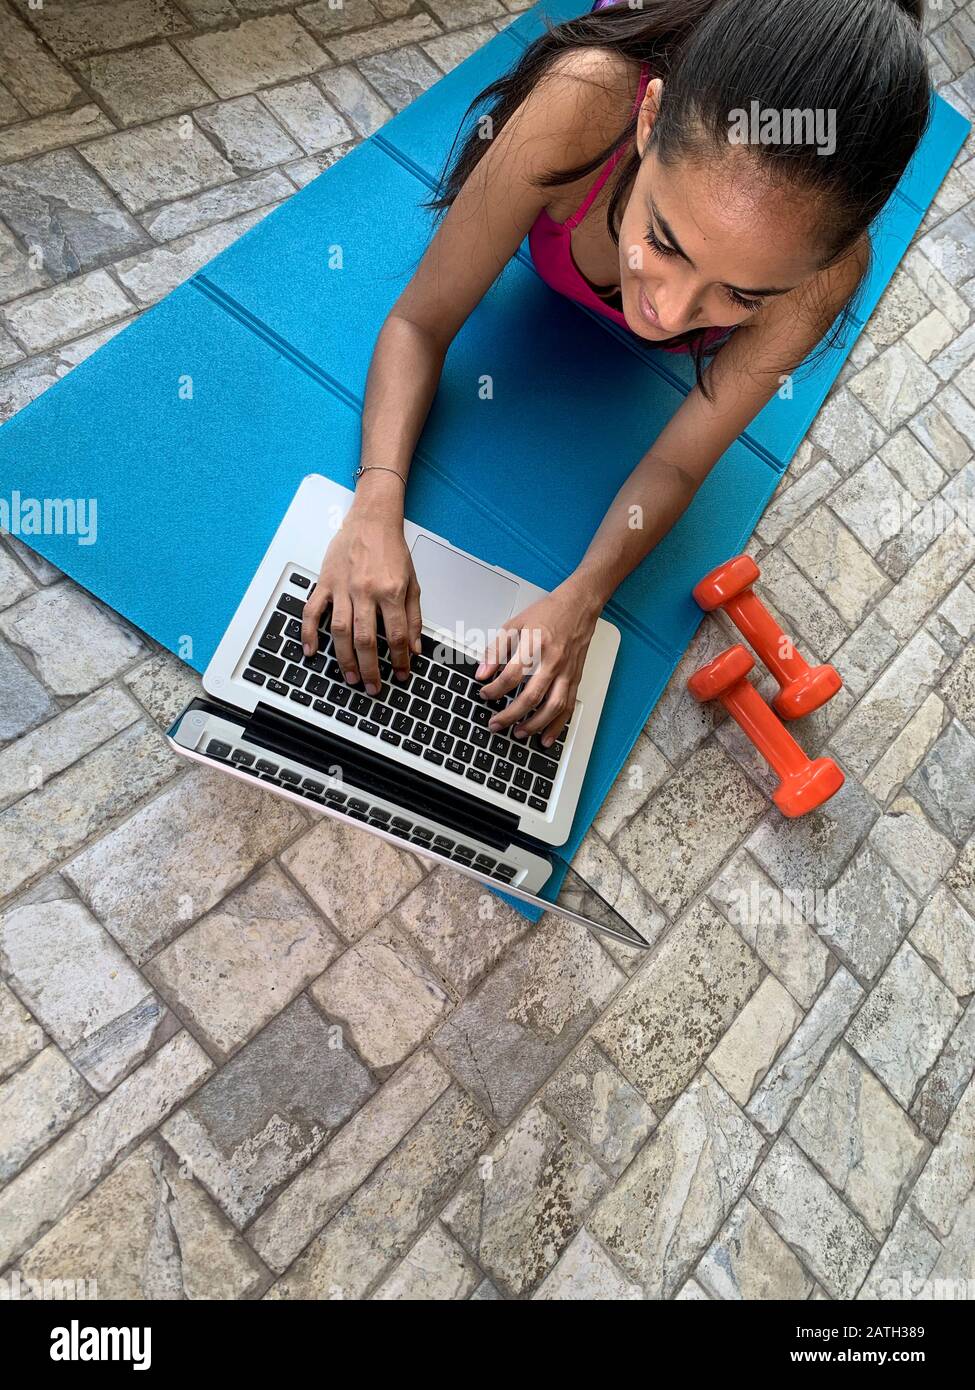 Latin girl exercising at home with a laptop, Panama, Central America Stock Photo